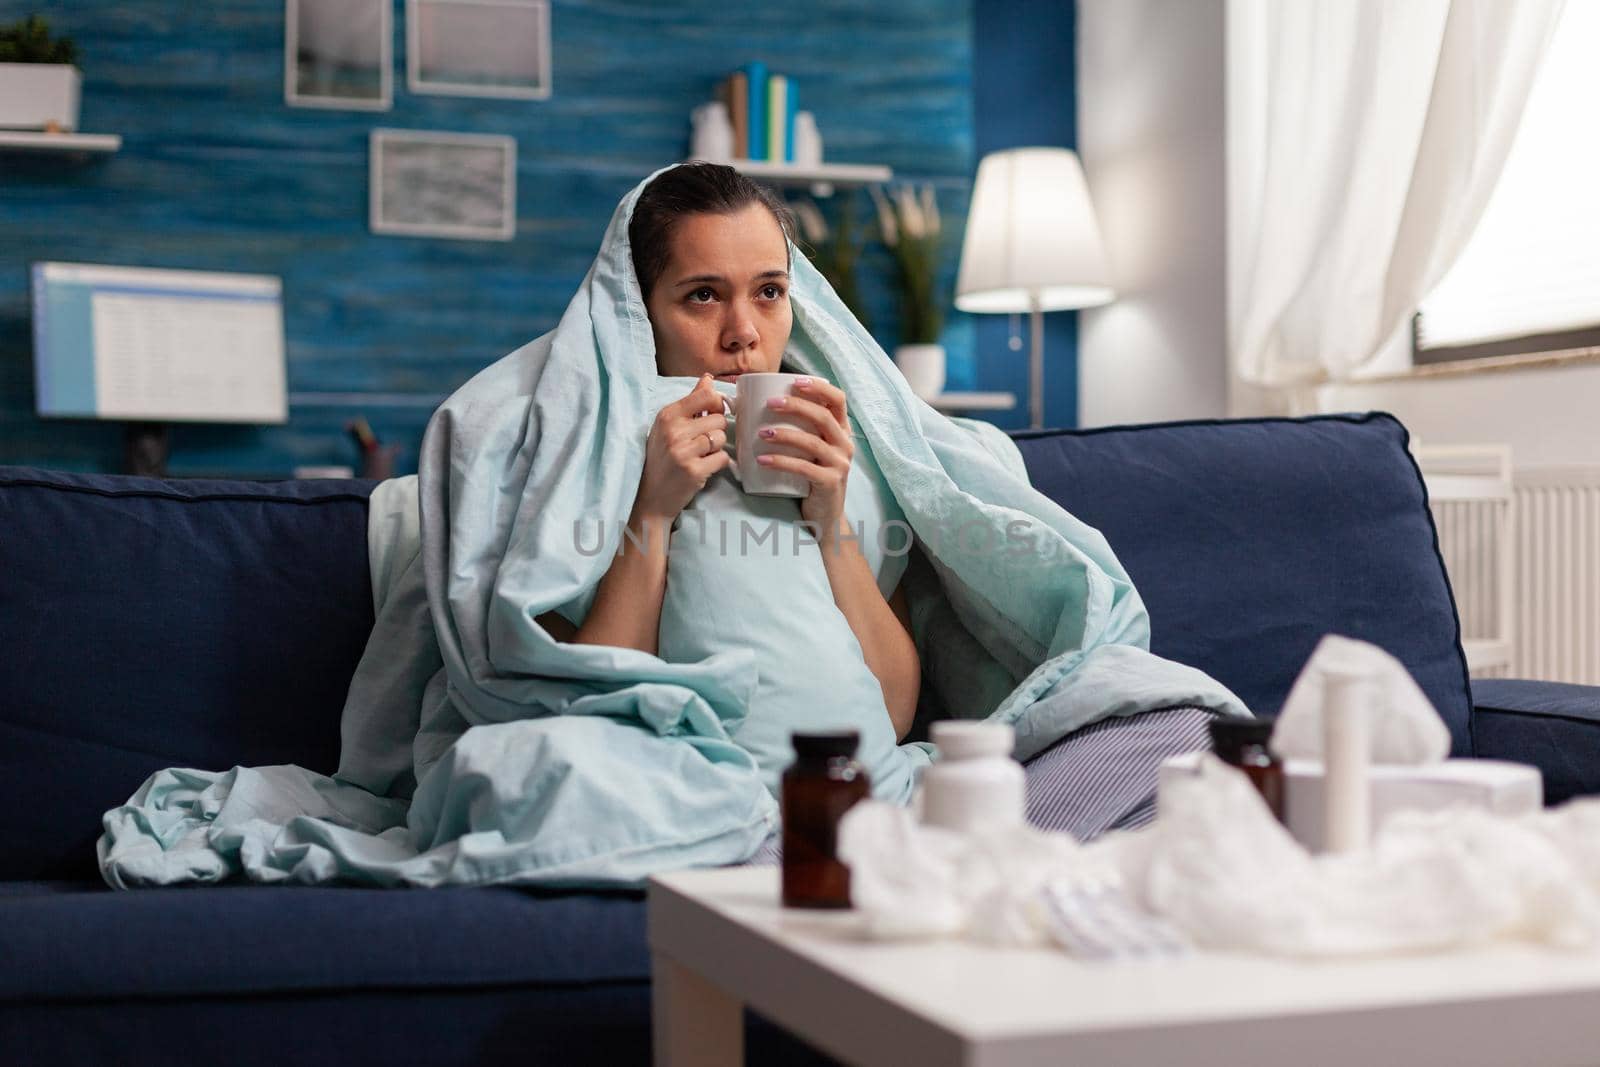 Woman feeling sick in blanket with warm drink at home having seasonal virus symptoms. Unwell young adult in pain headache resting on couch with medical treatment against coronavirus